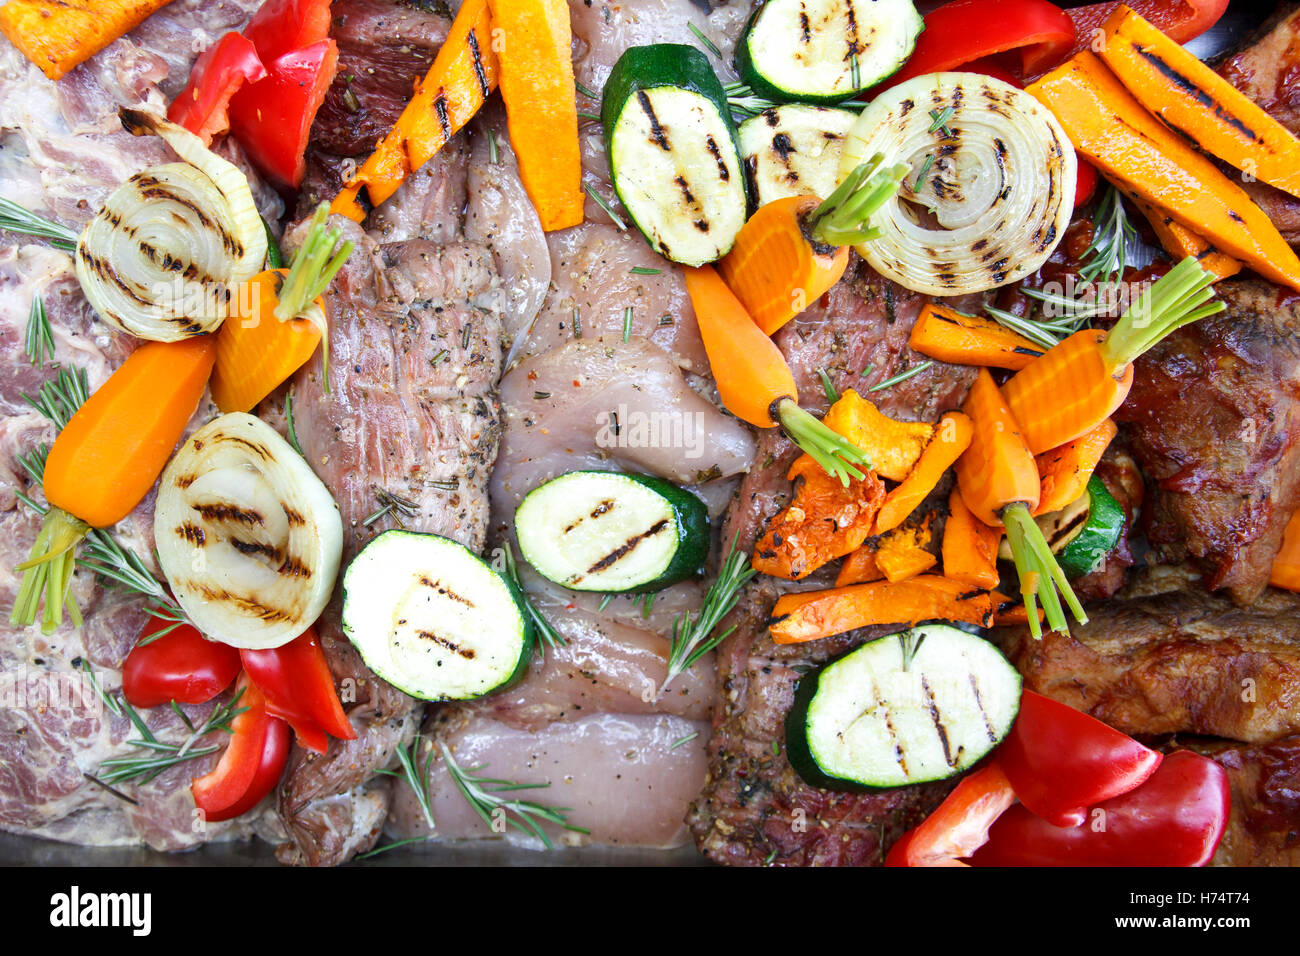 Mixed raw meat and grilled vegetables marinating ready for barbeque. Stock Photo